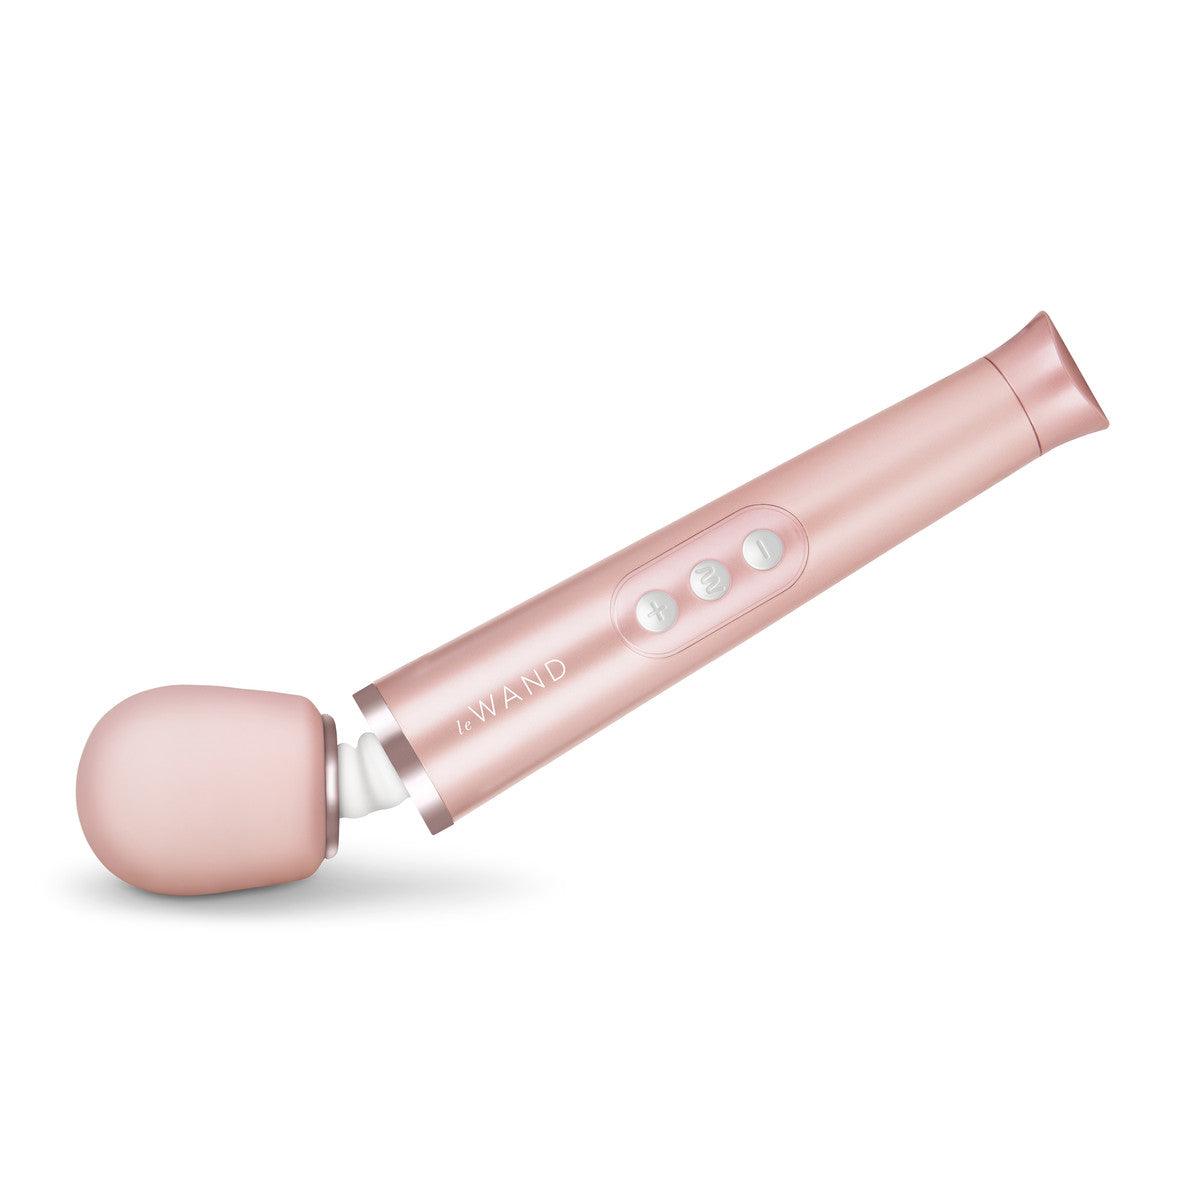 Le Wand Petite Massager - Adult Toys